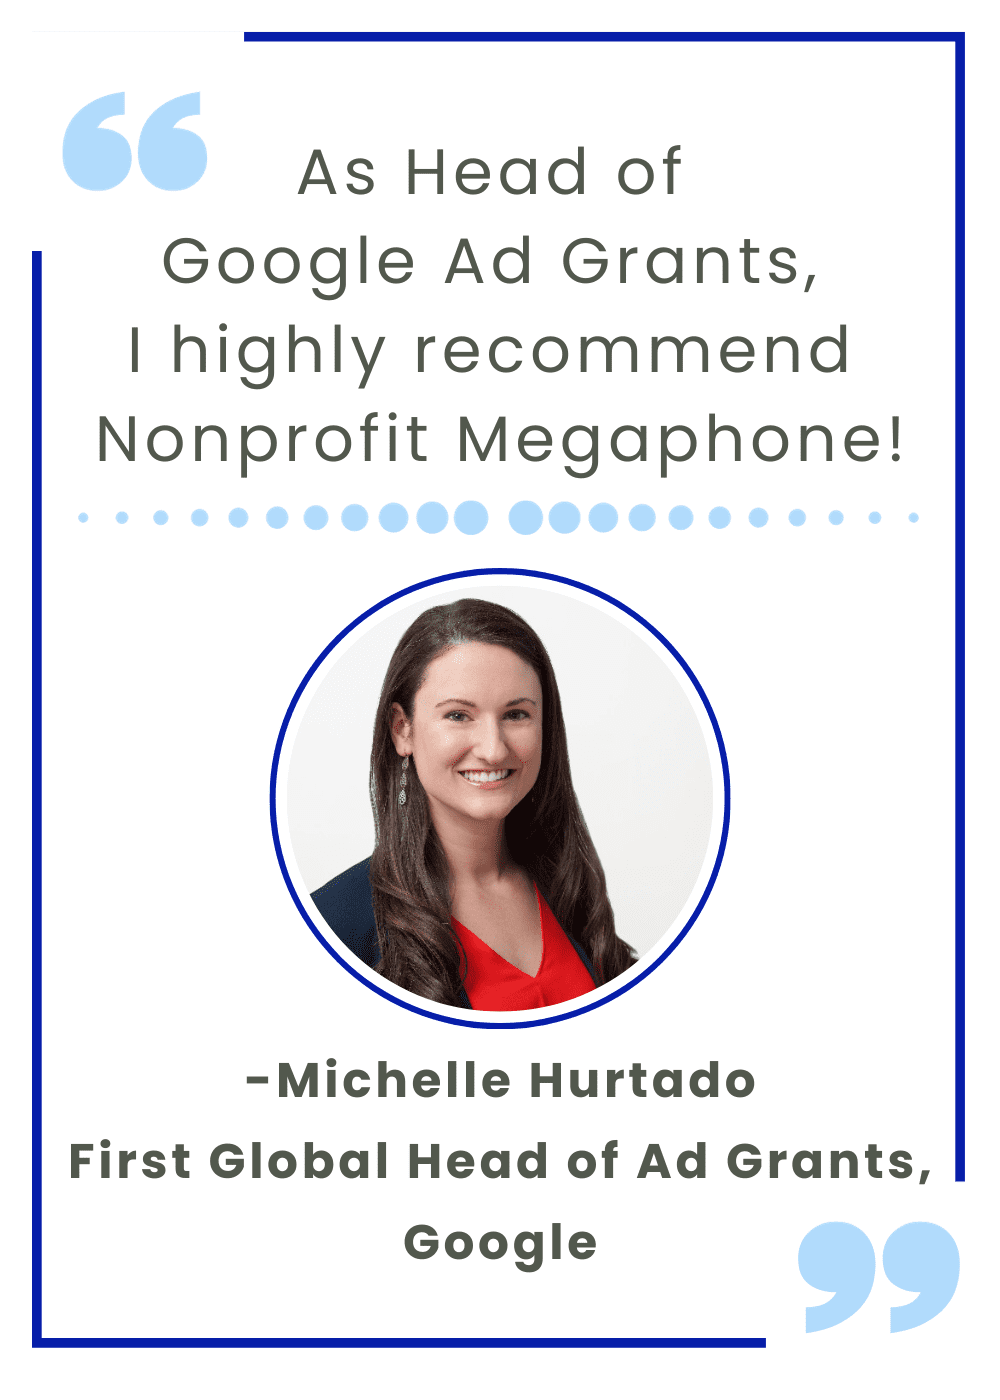 As Head of Google Ad Grants, I highly recommend Nonprofit Megaphone!